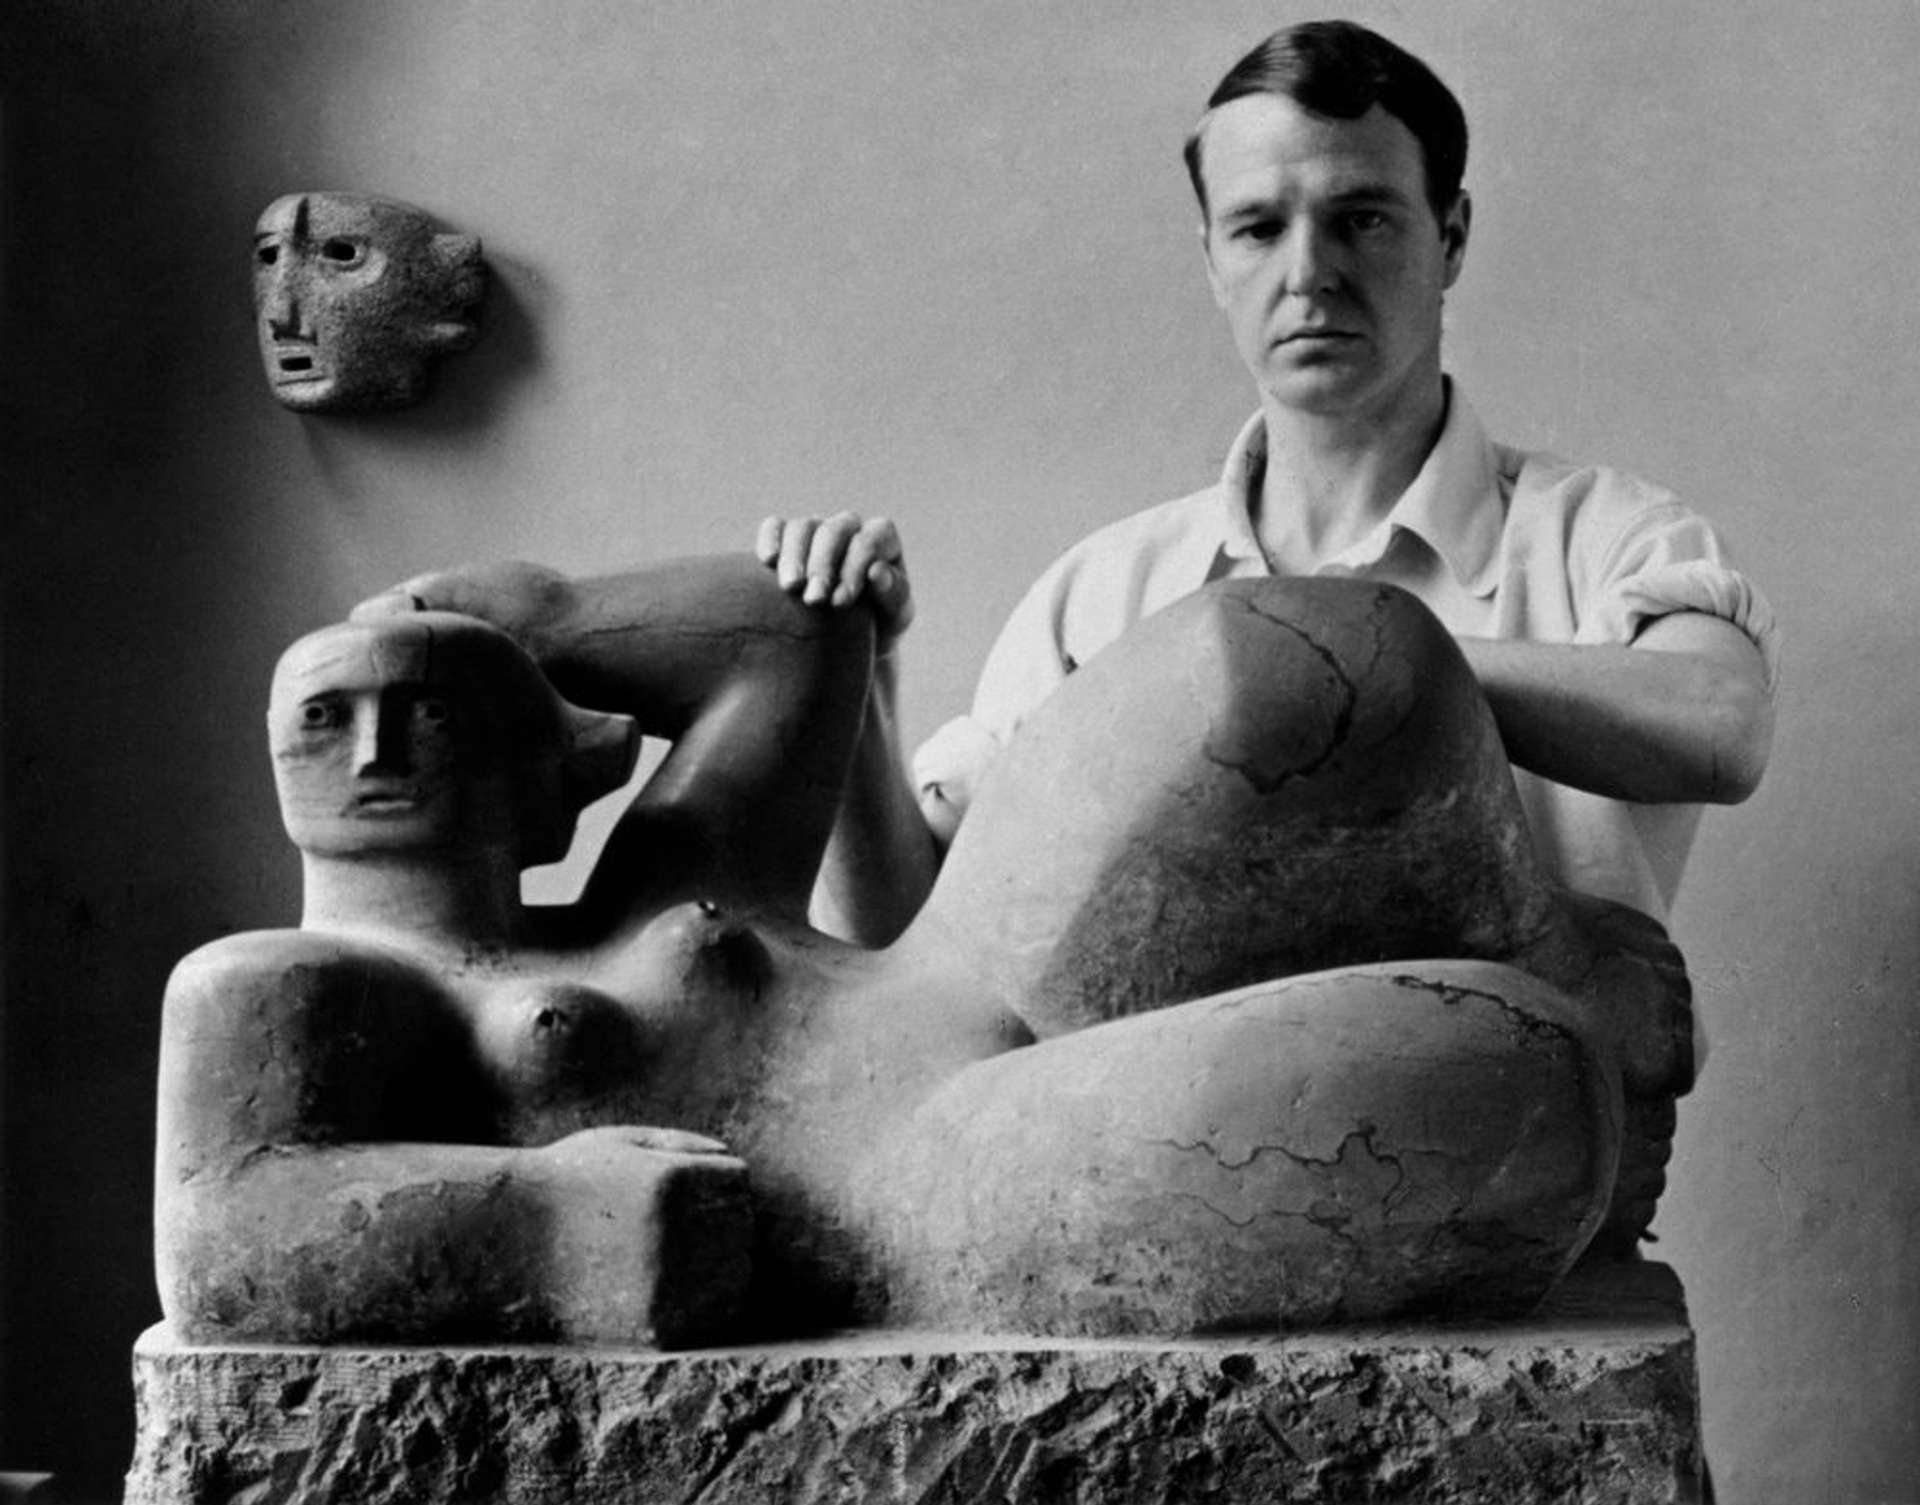 Black-and-white photograph of Henry Moore standing next to a large-scale sculpture. Moore, wearing a white short-sleeve shirt, is positioned beside the abstracted reclining figures sculpture. His hands rest on the raised elbow and knee of the artwork as he gazes directly at the camera.